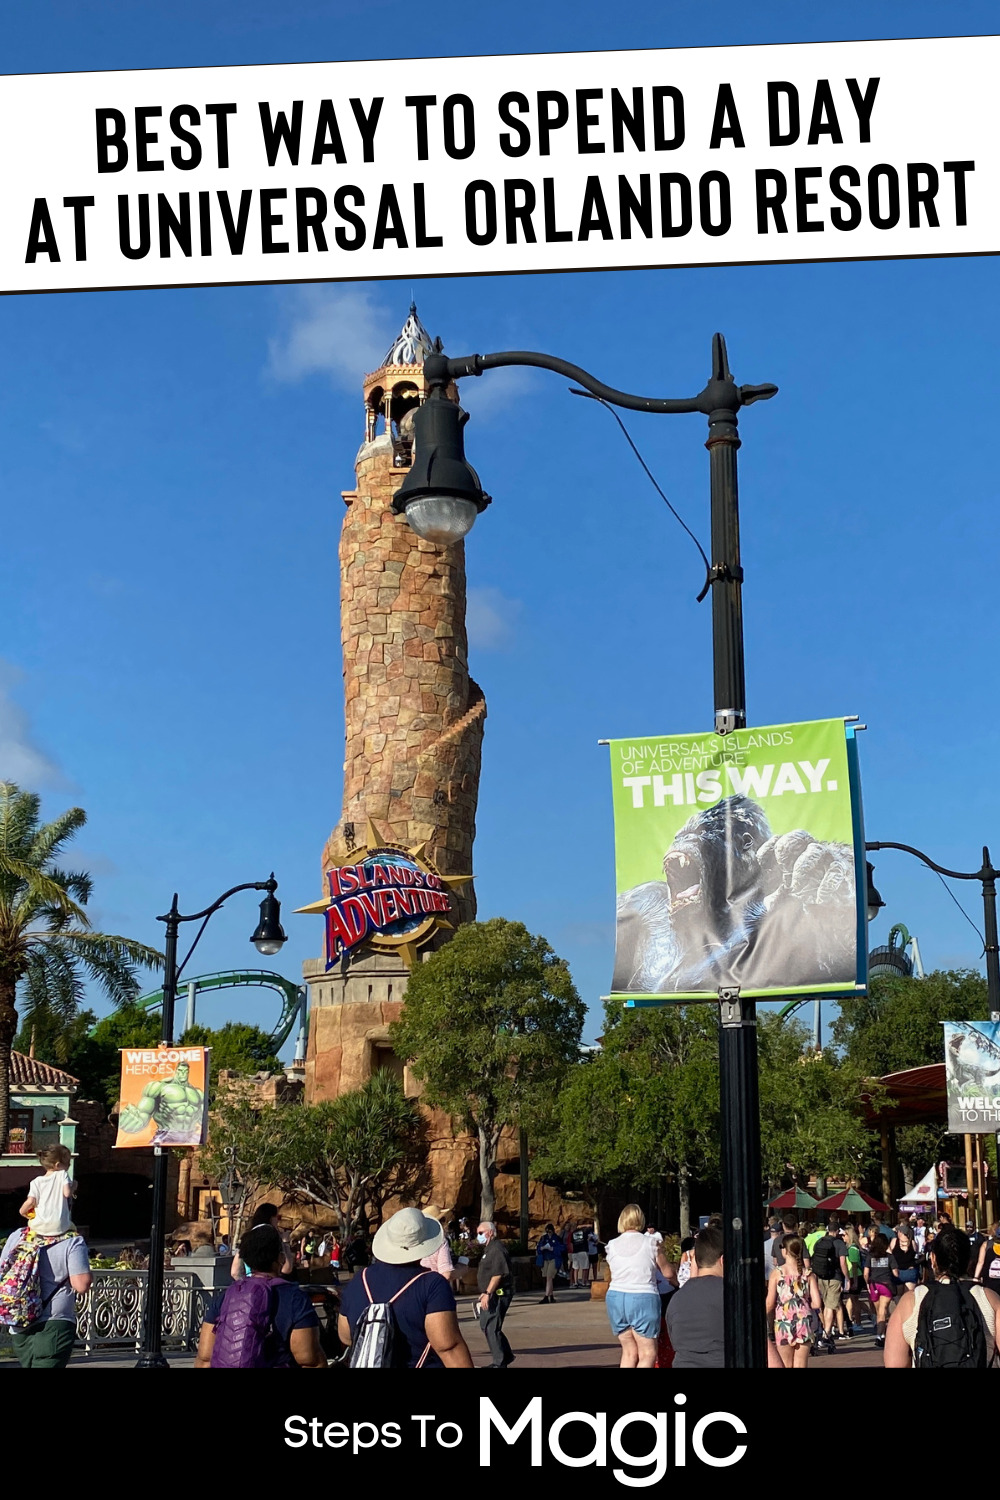 Best Way to Spend a Day at Universal Orlando Resort